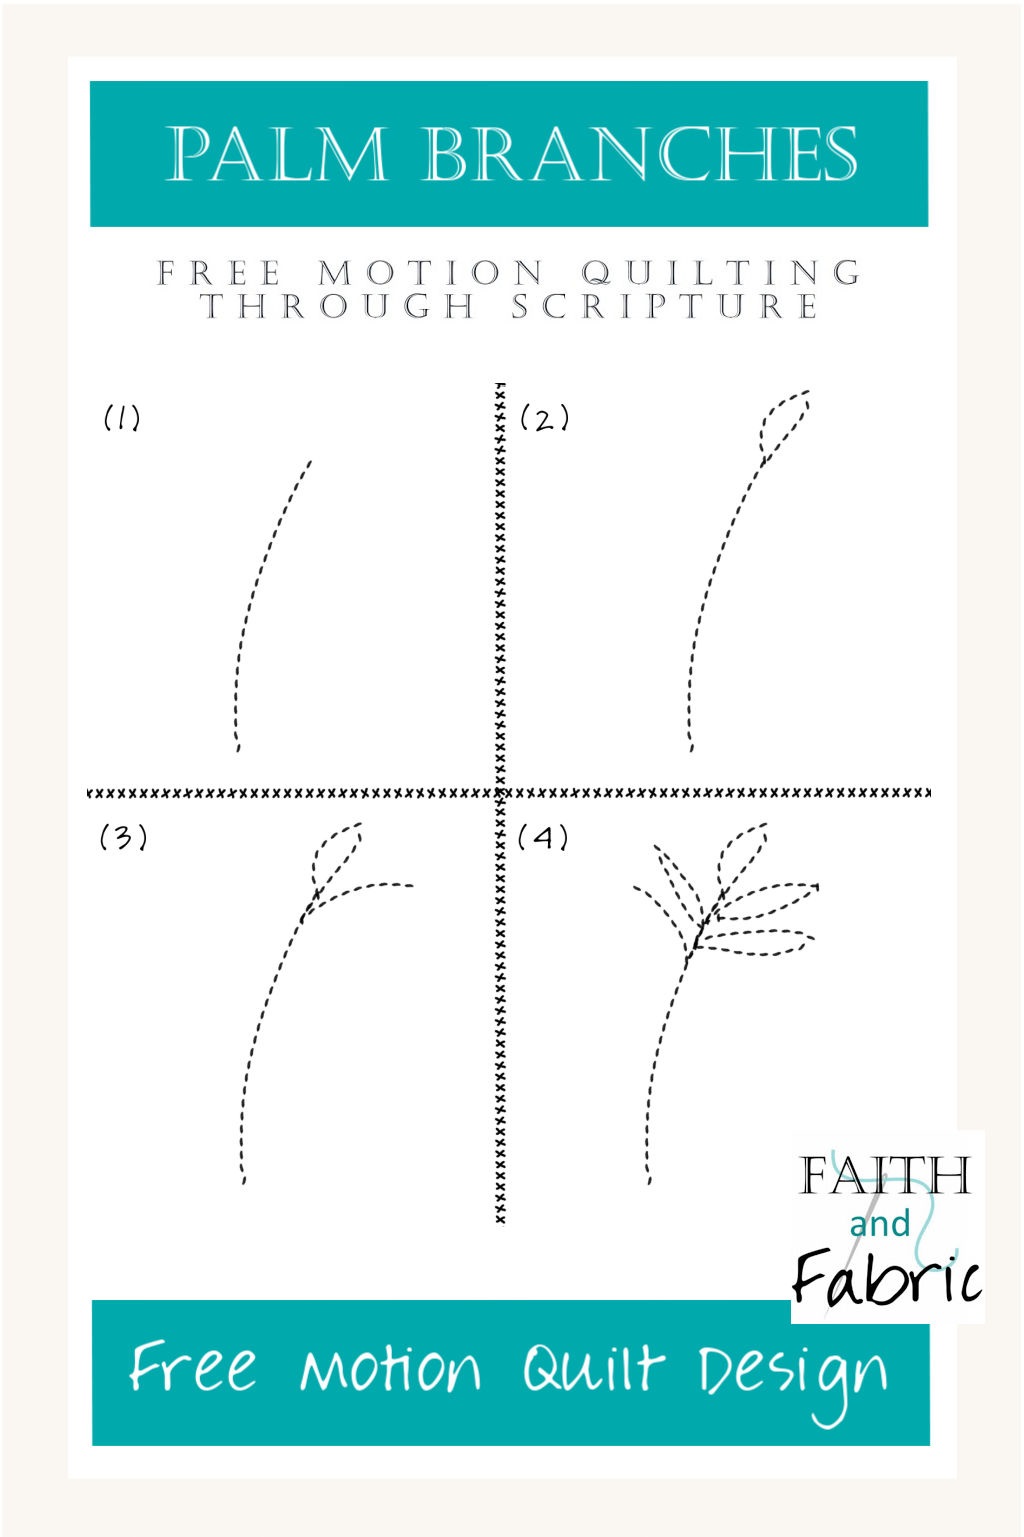 Sew beautiful palm branches with this free motion quilting design! We'll show you, step by step, how to free motion quilt natural-looking palm fronds in just three key steps. Includes bonus FMQ video tutorial!